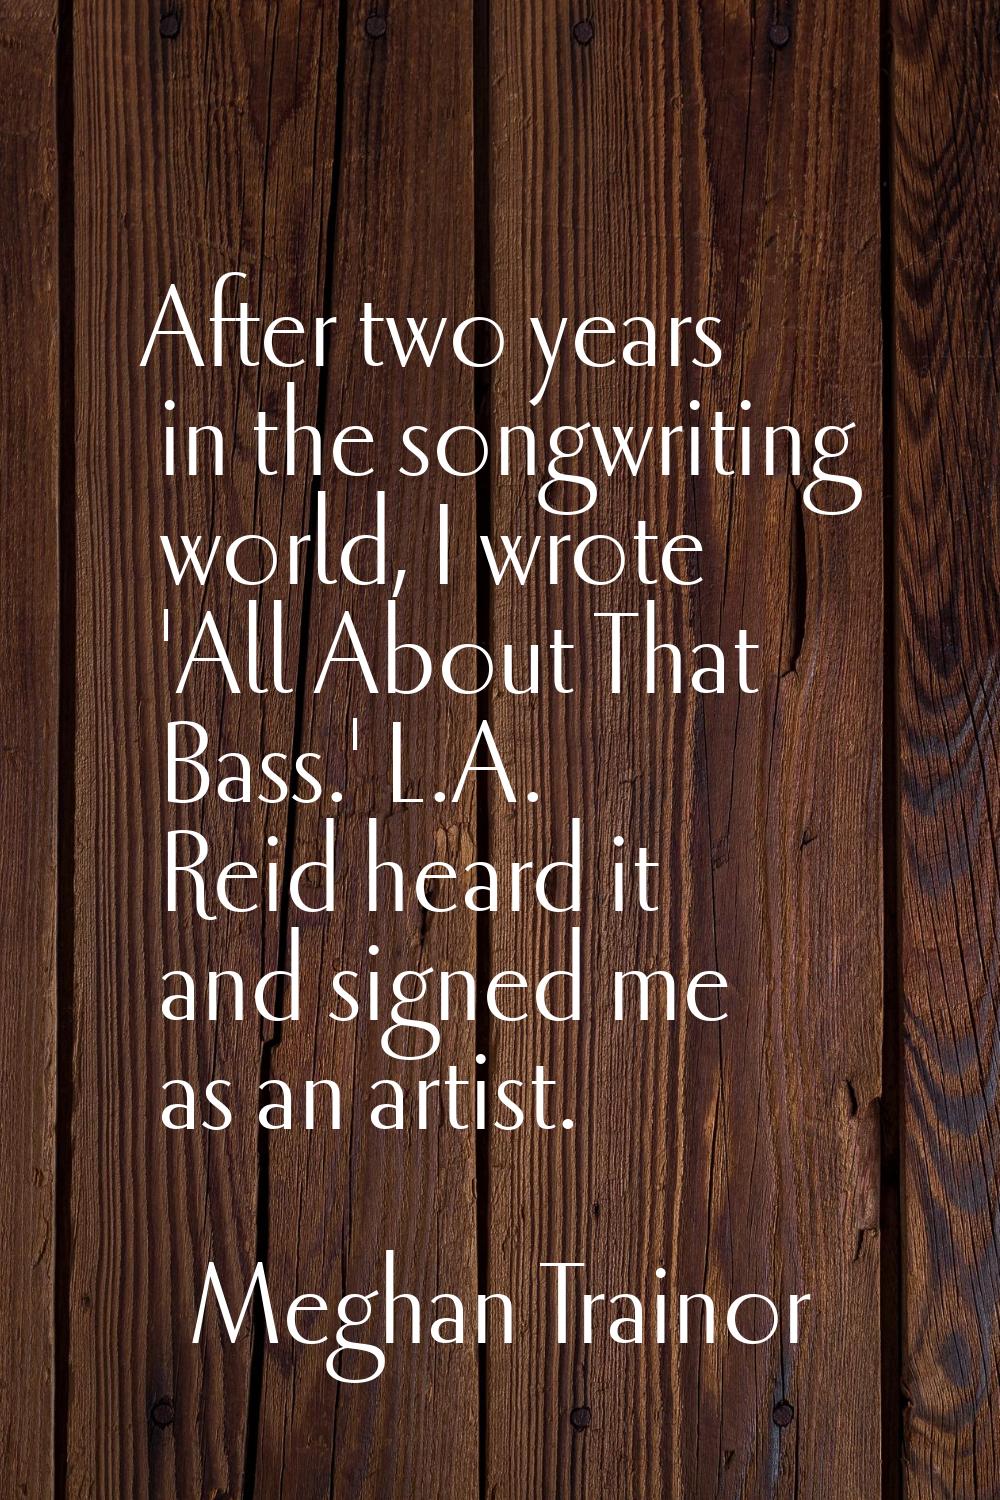 After two years in the songwriting world, I wrote 'All About That Bass.' L.A. Reid heard it and sig